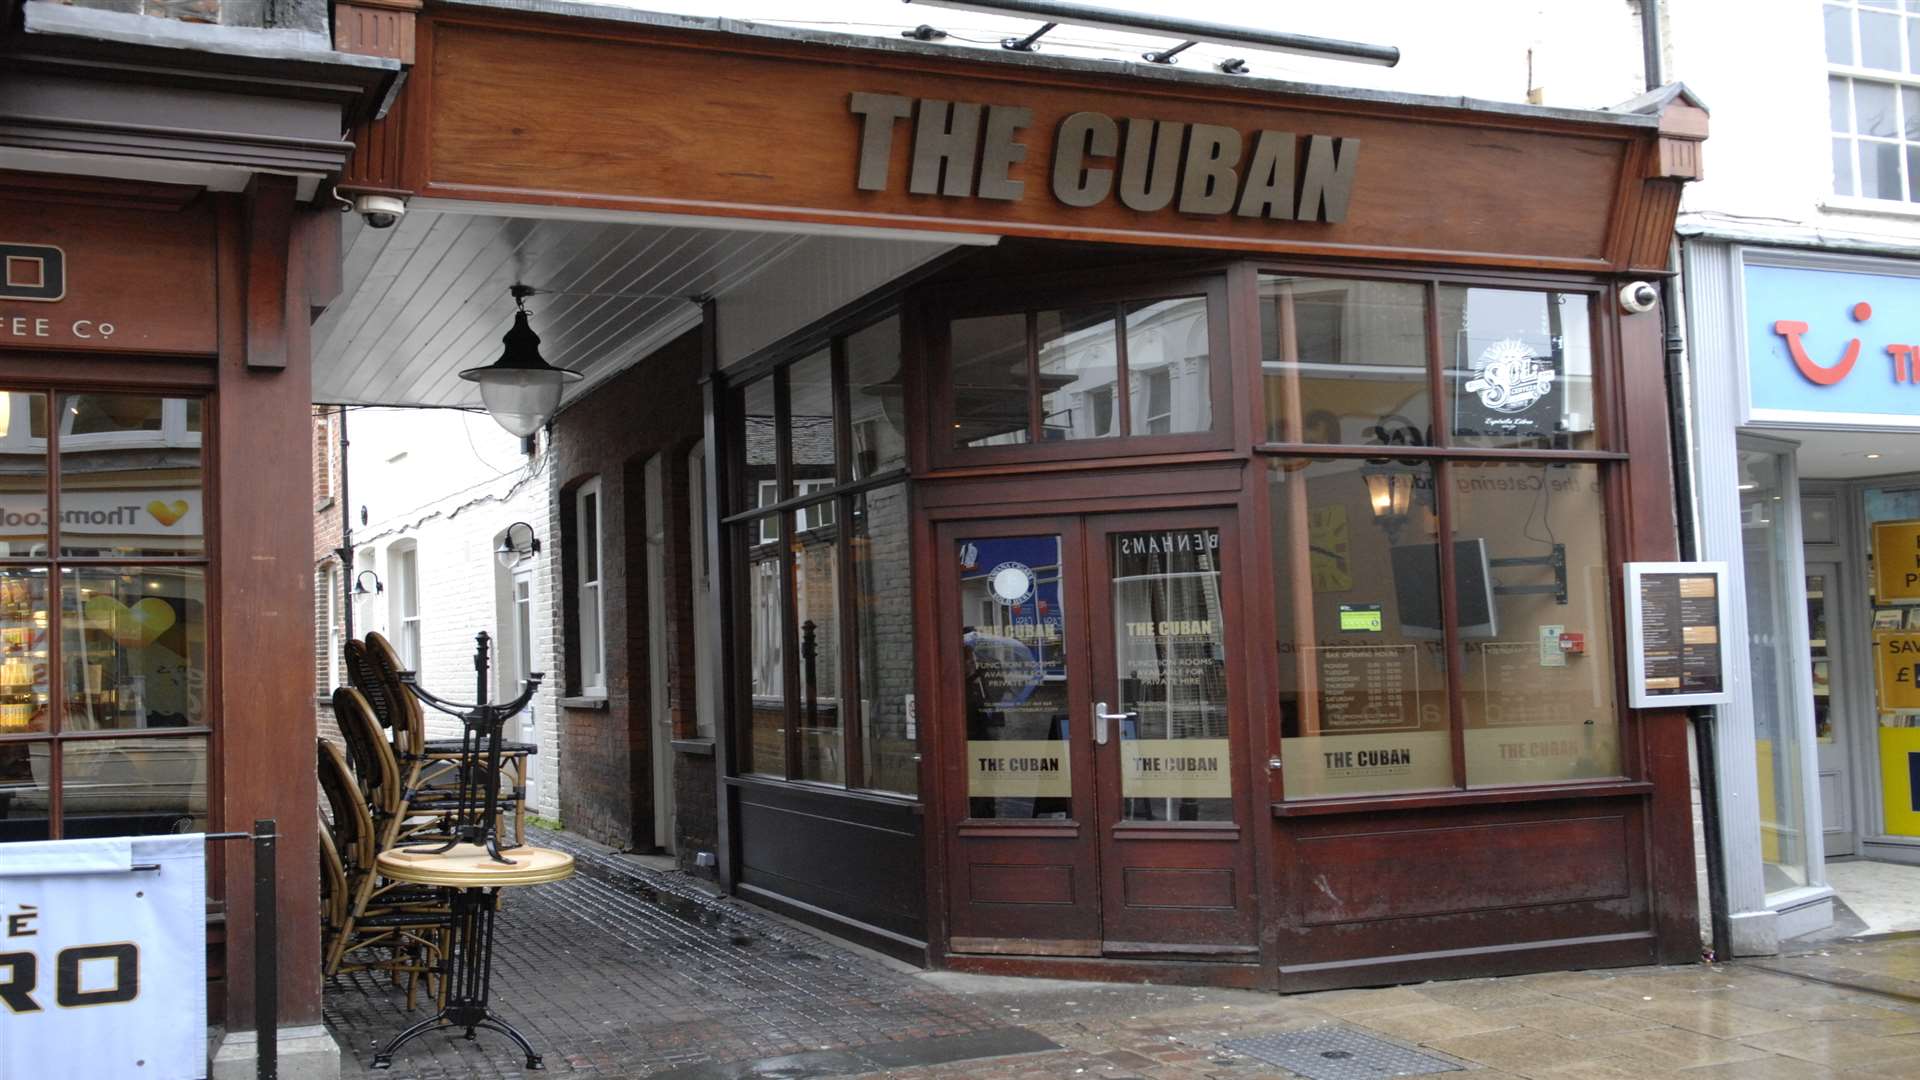 Ali Ketbi had been thrown out of the Cuban Bar for fighting